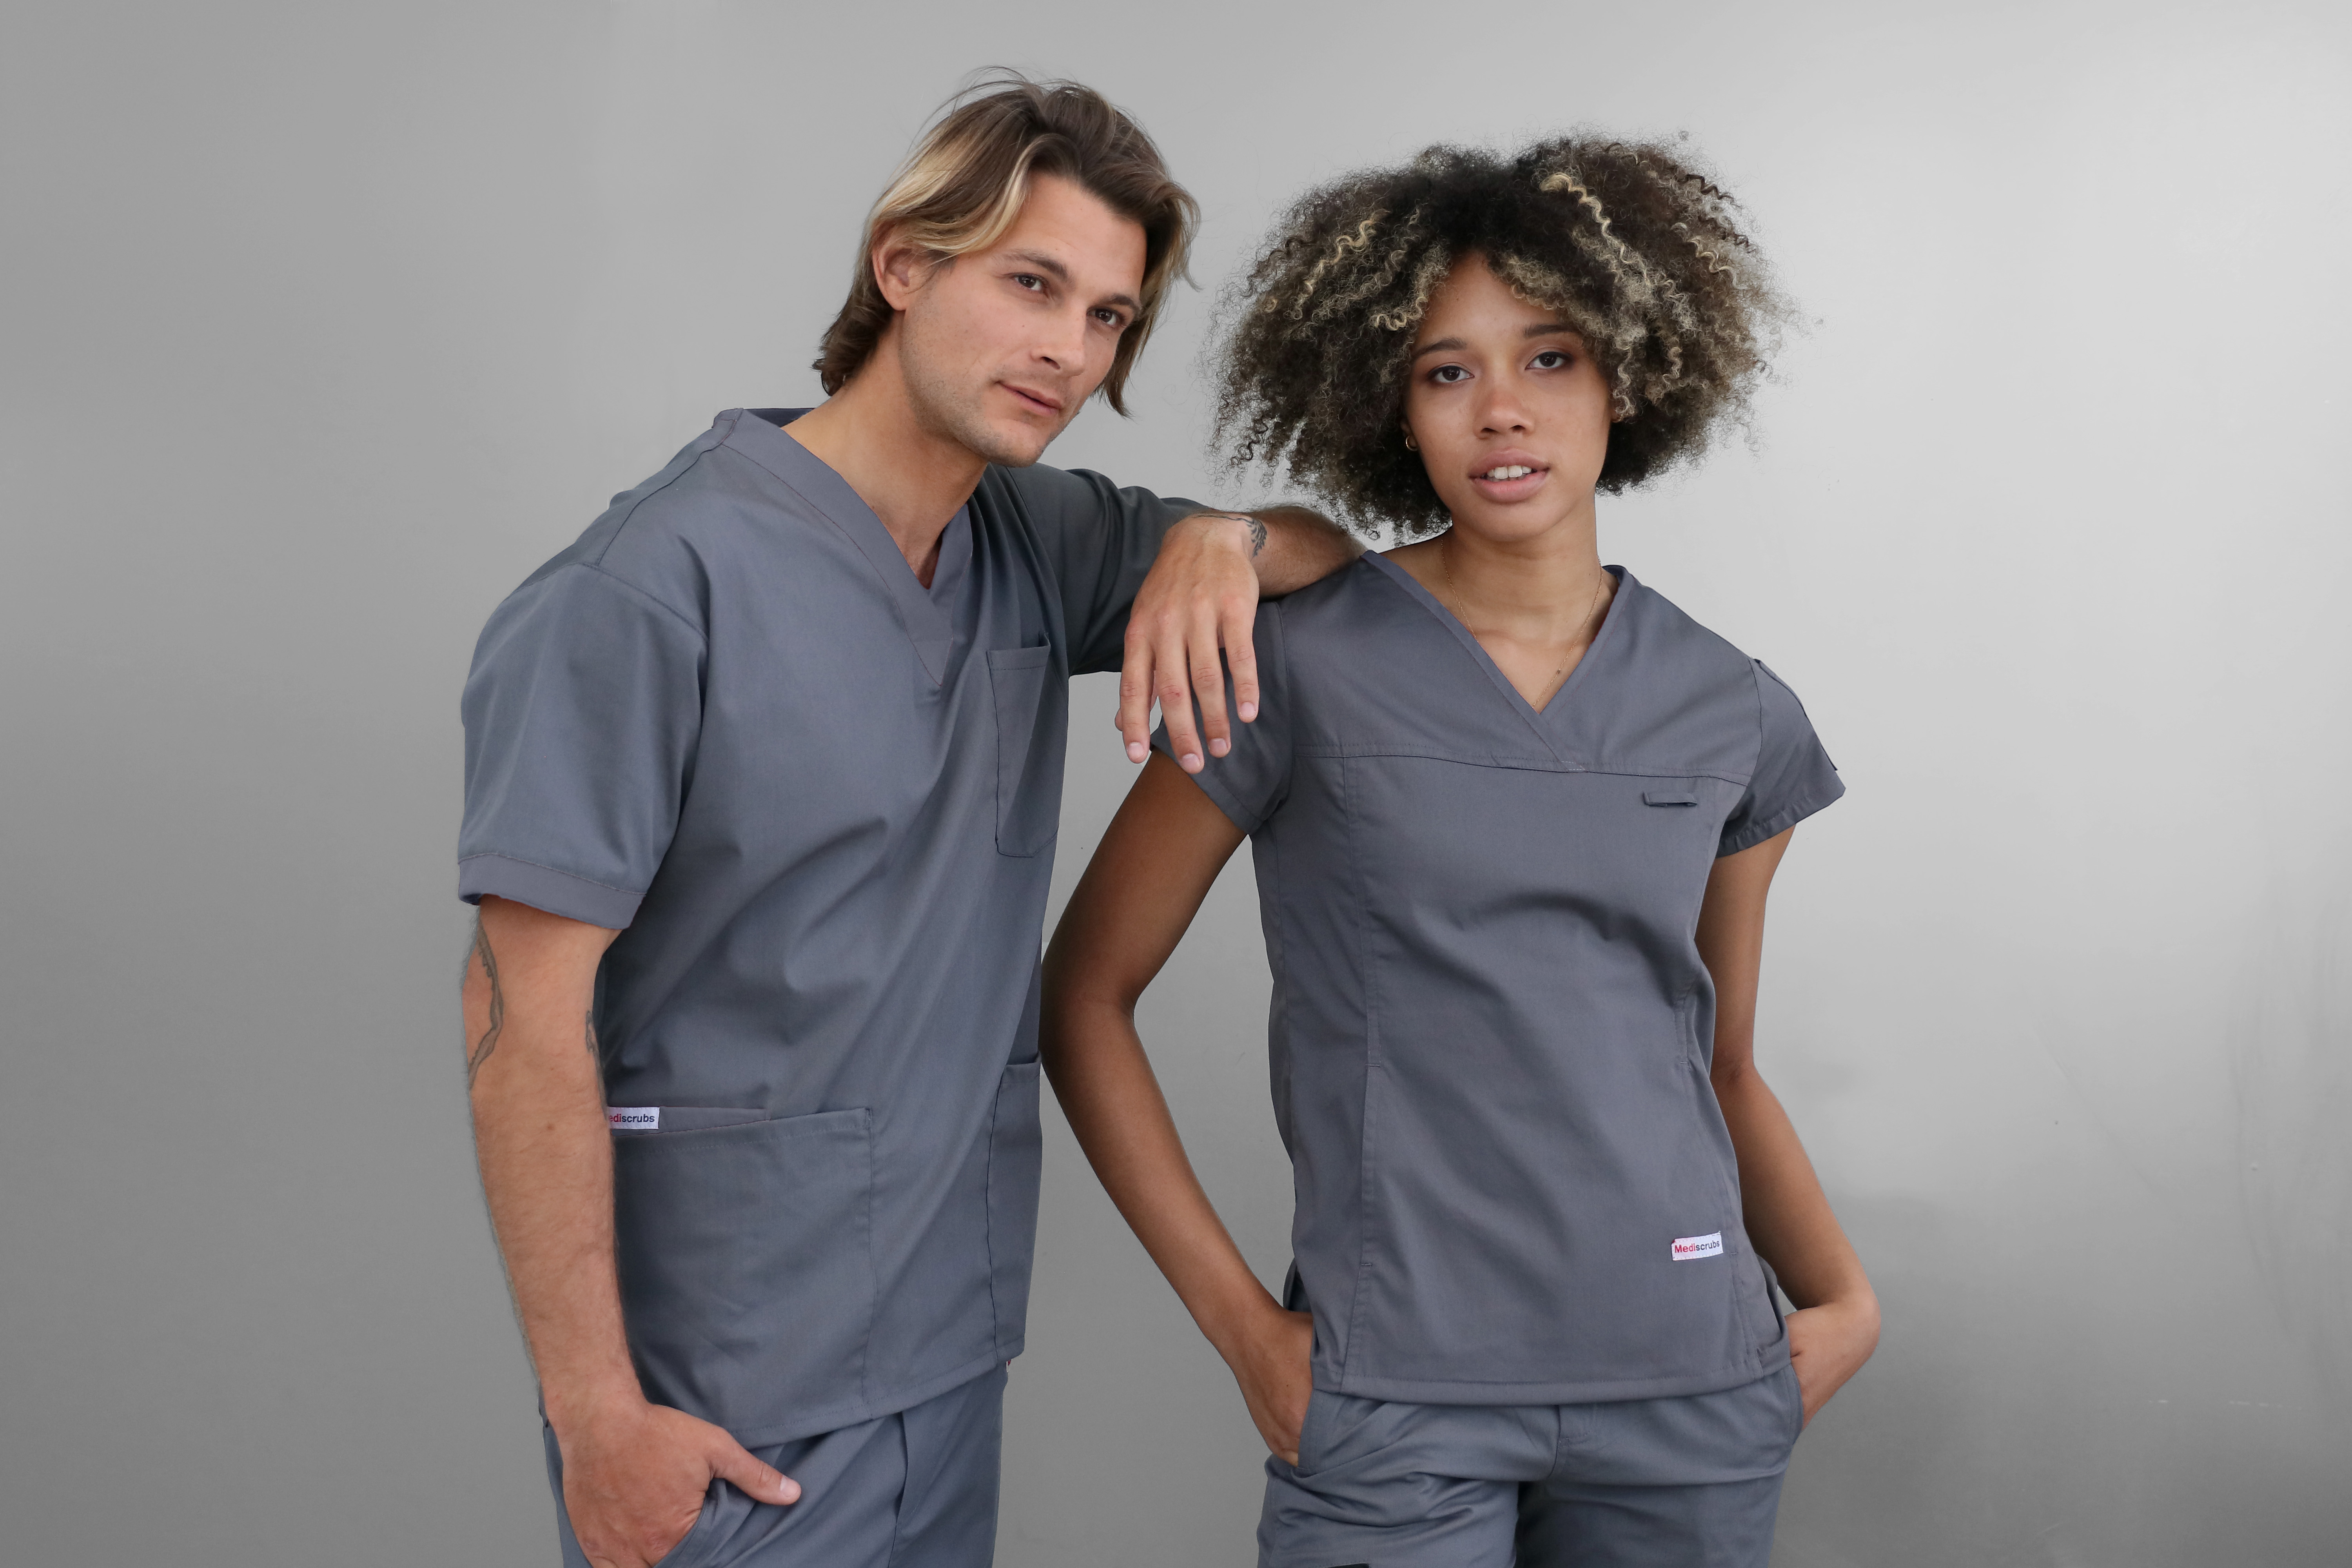 What's Hot in the World of Medical Apparel and Nursing Scrubs?